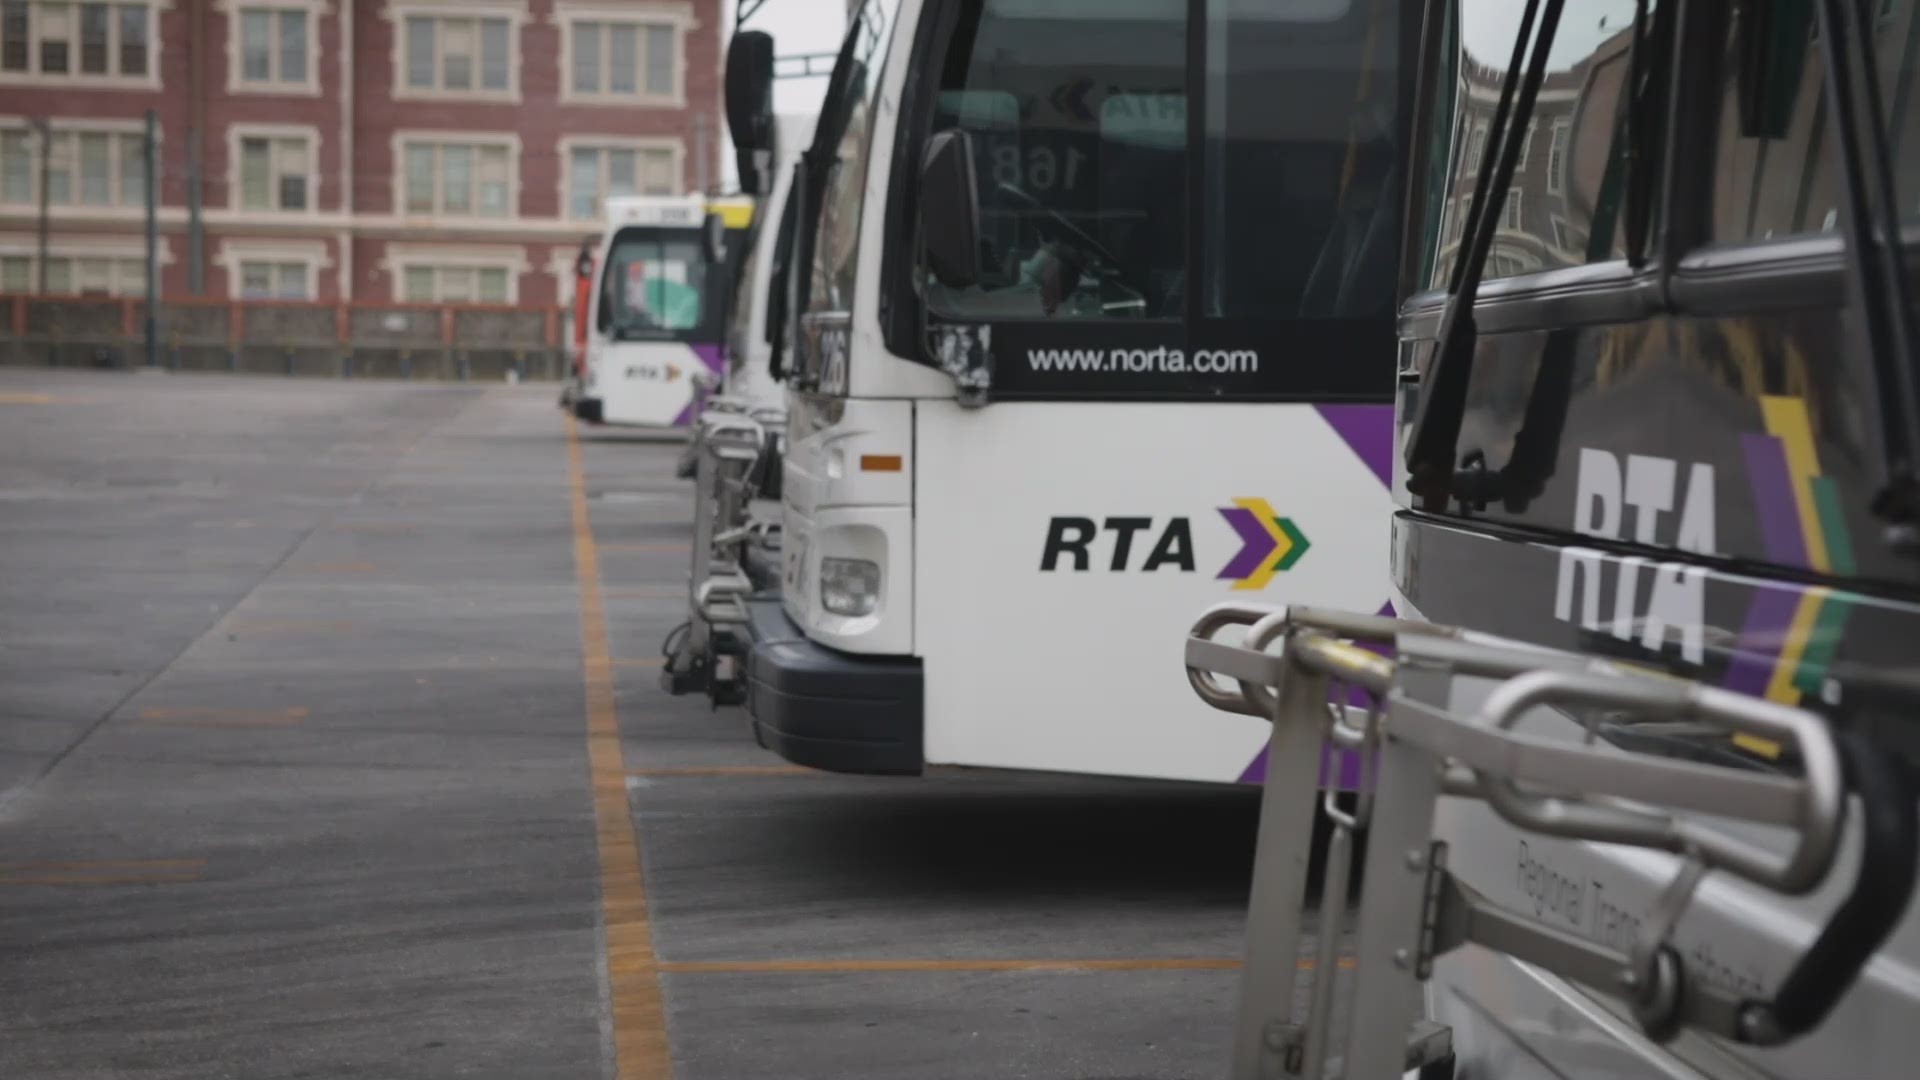 Riders will know when the next bus or streetcar is coming and pay ahead of time.